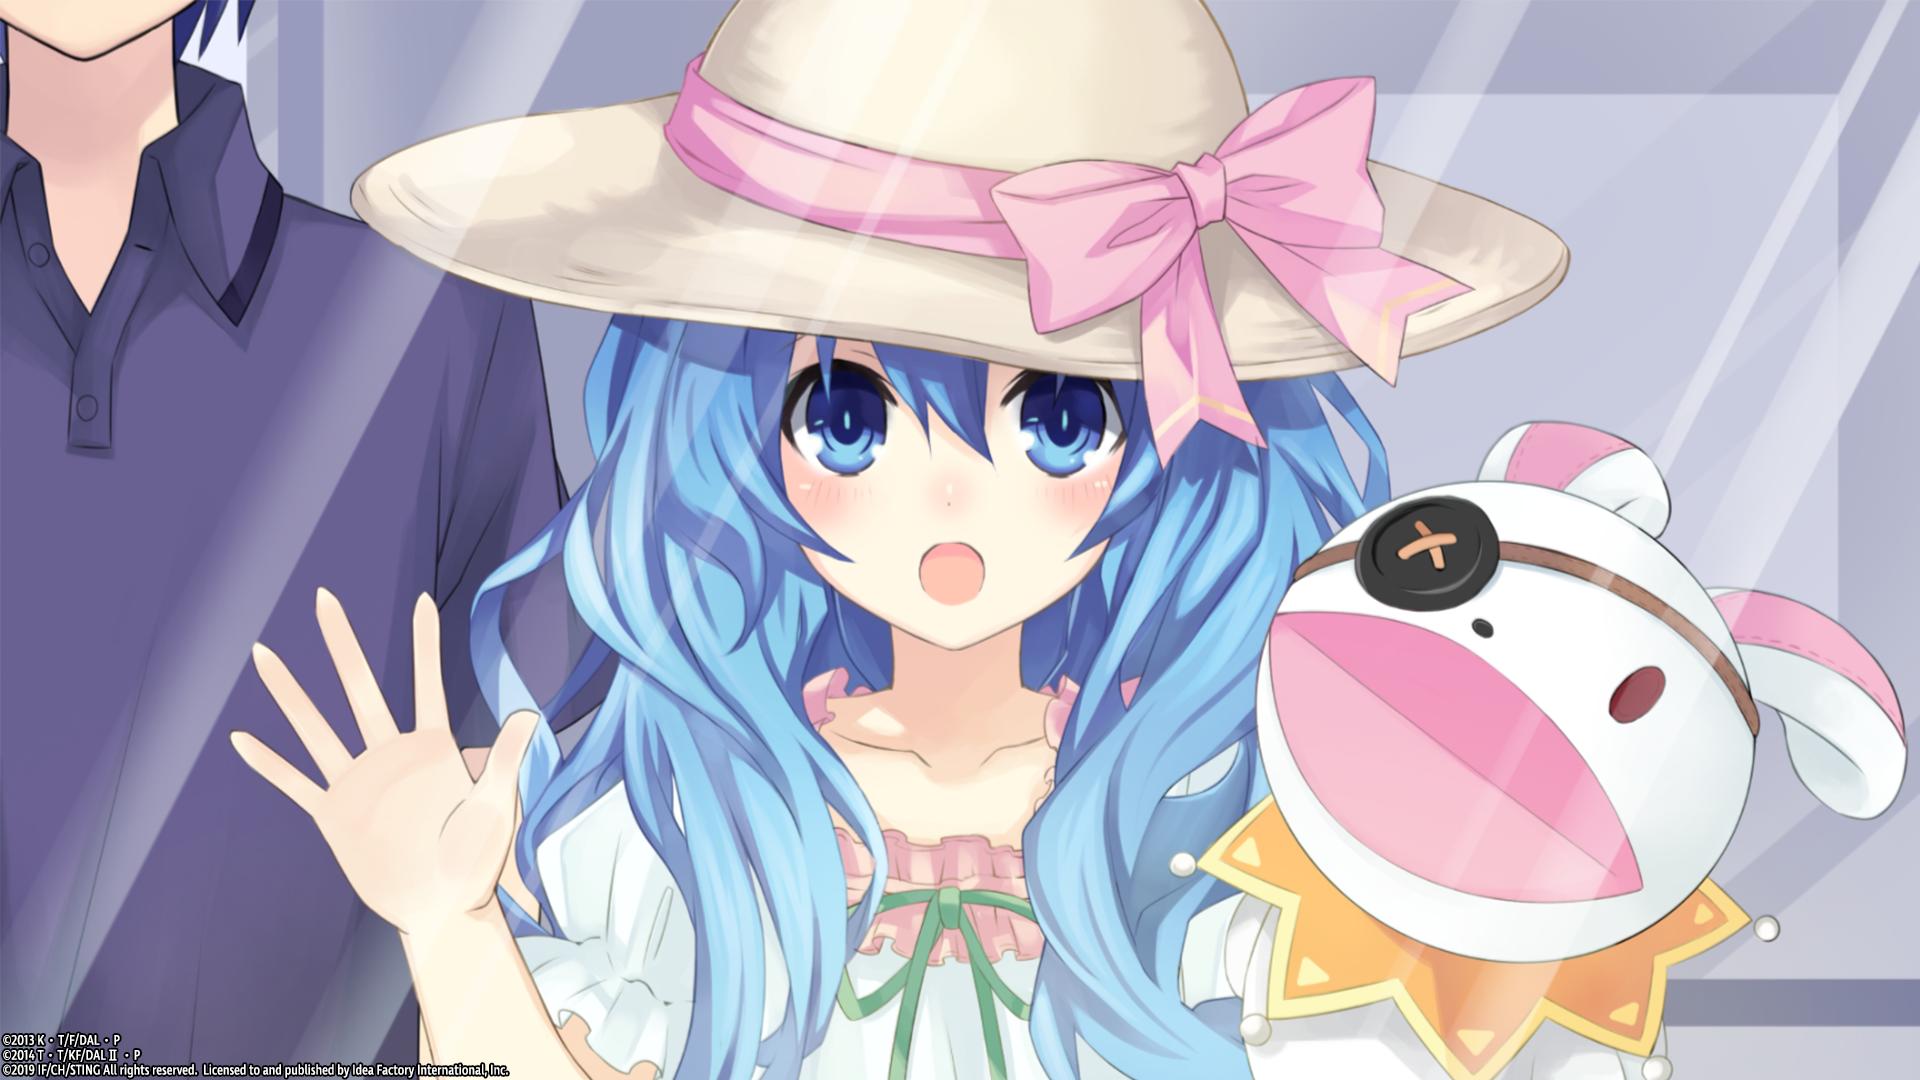 Idea Factory Intl Date A Live Rio Reincarnation Releases July 23 For Ps4 In North America Preorder For The Playstation 4 Today T Co 2v1i2sjh39 Iffy Cial Website T Co Msj0vzt0u6 Funimation T Co Csrji6rwmz